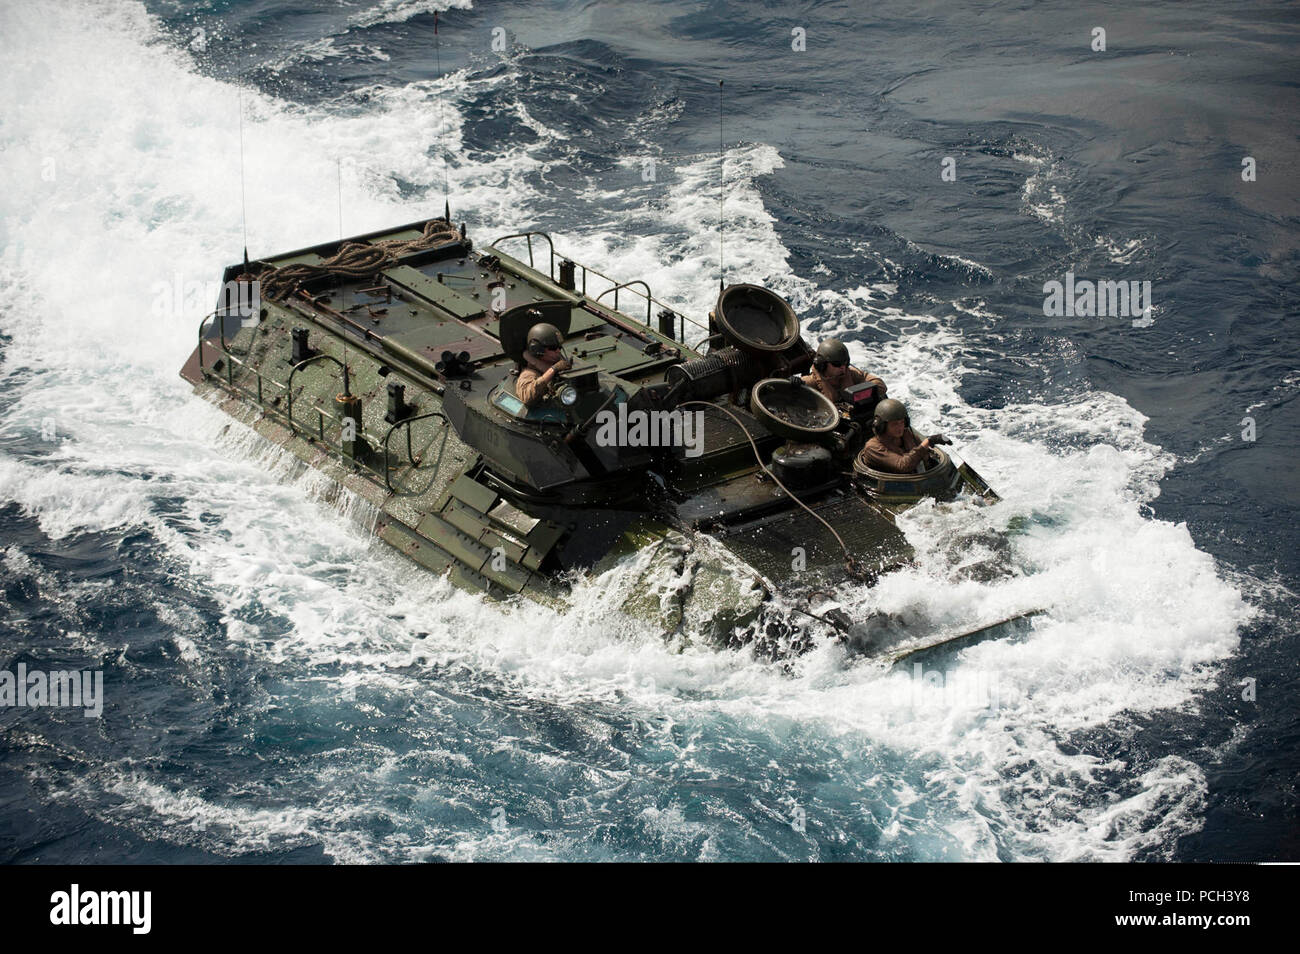 A U.S. Marine Corps assault amphibious vehicle prepares to enter the well deck of the amphibious assault ship USS Bonhomme Richard (LHD 6) in the East China Sea March 11, 2014. The Bonhomme Richard was the lead ship of the Bonhomme Richard Amphibious Ready Group and, with the 31st Marine Expeditionary Unit, was conducting joint force operations in the U.S. 7th Fleet area of responsibility. Stock Photo